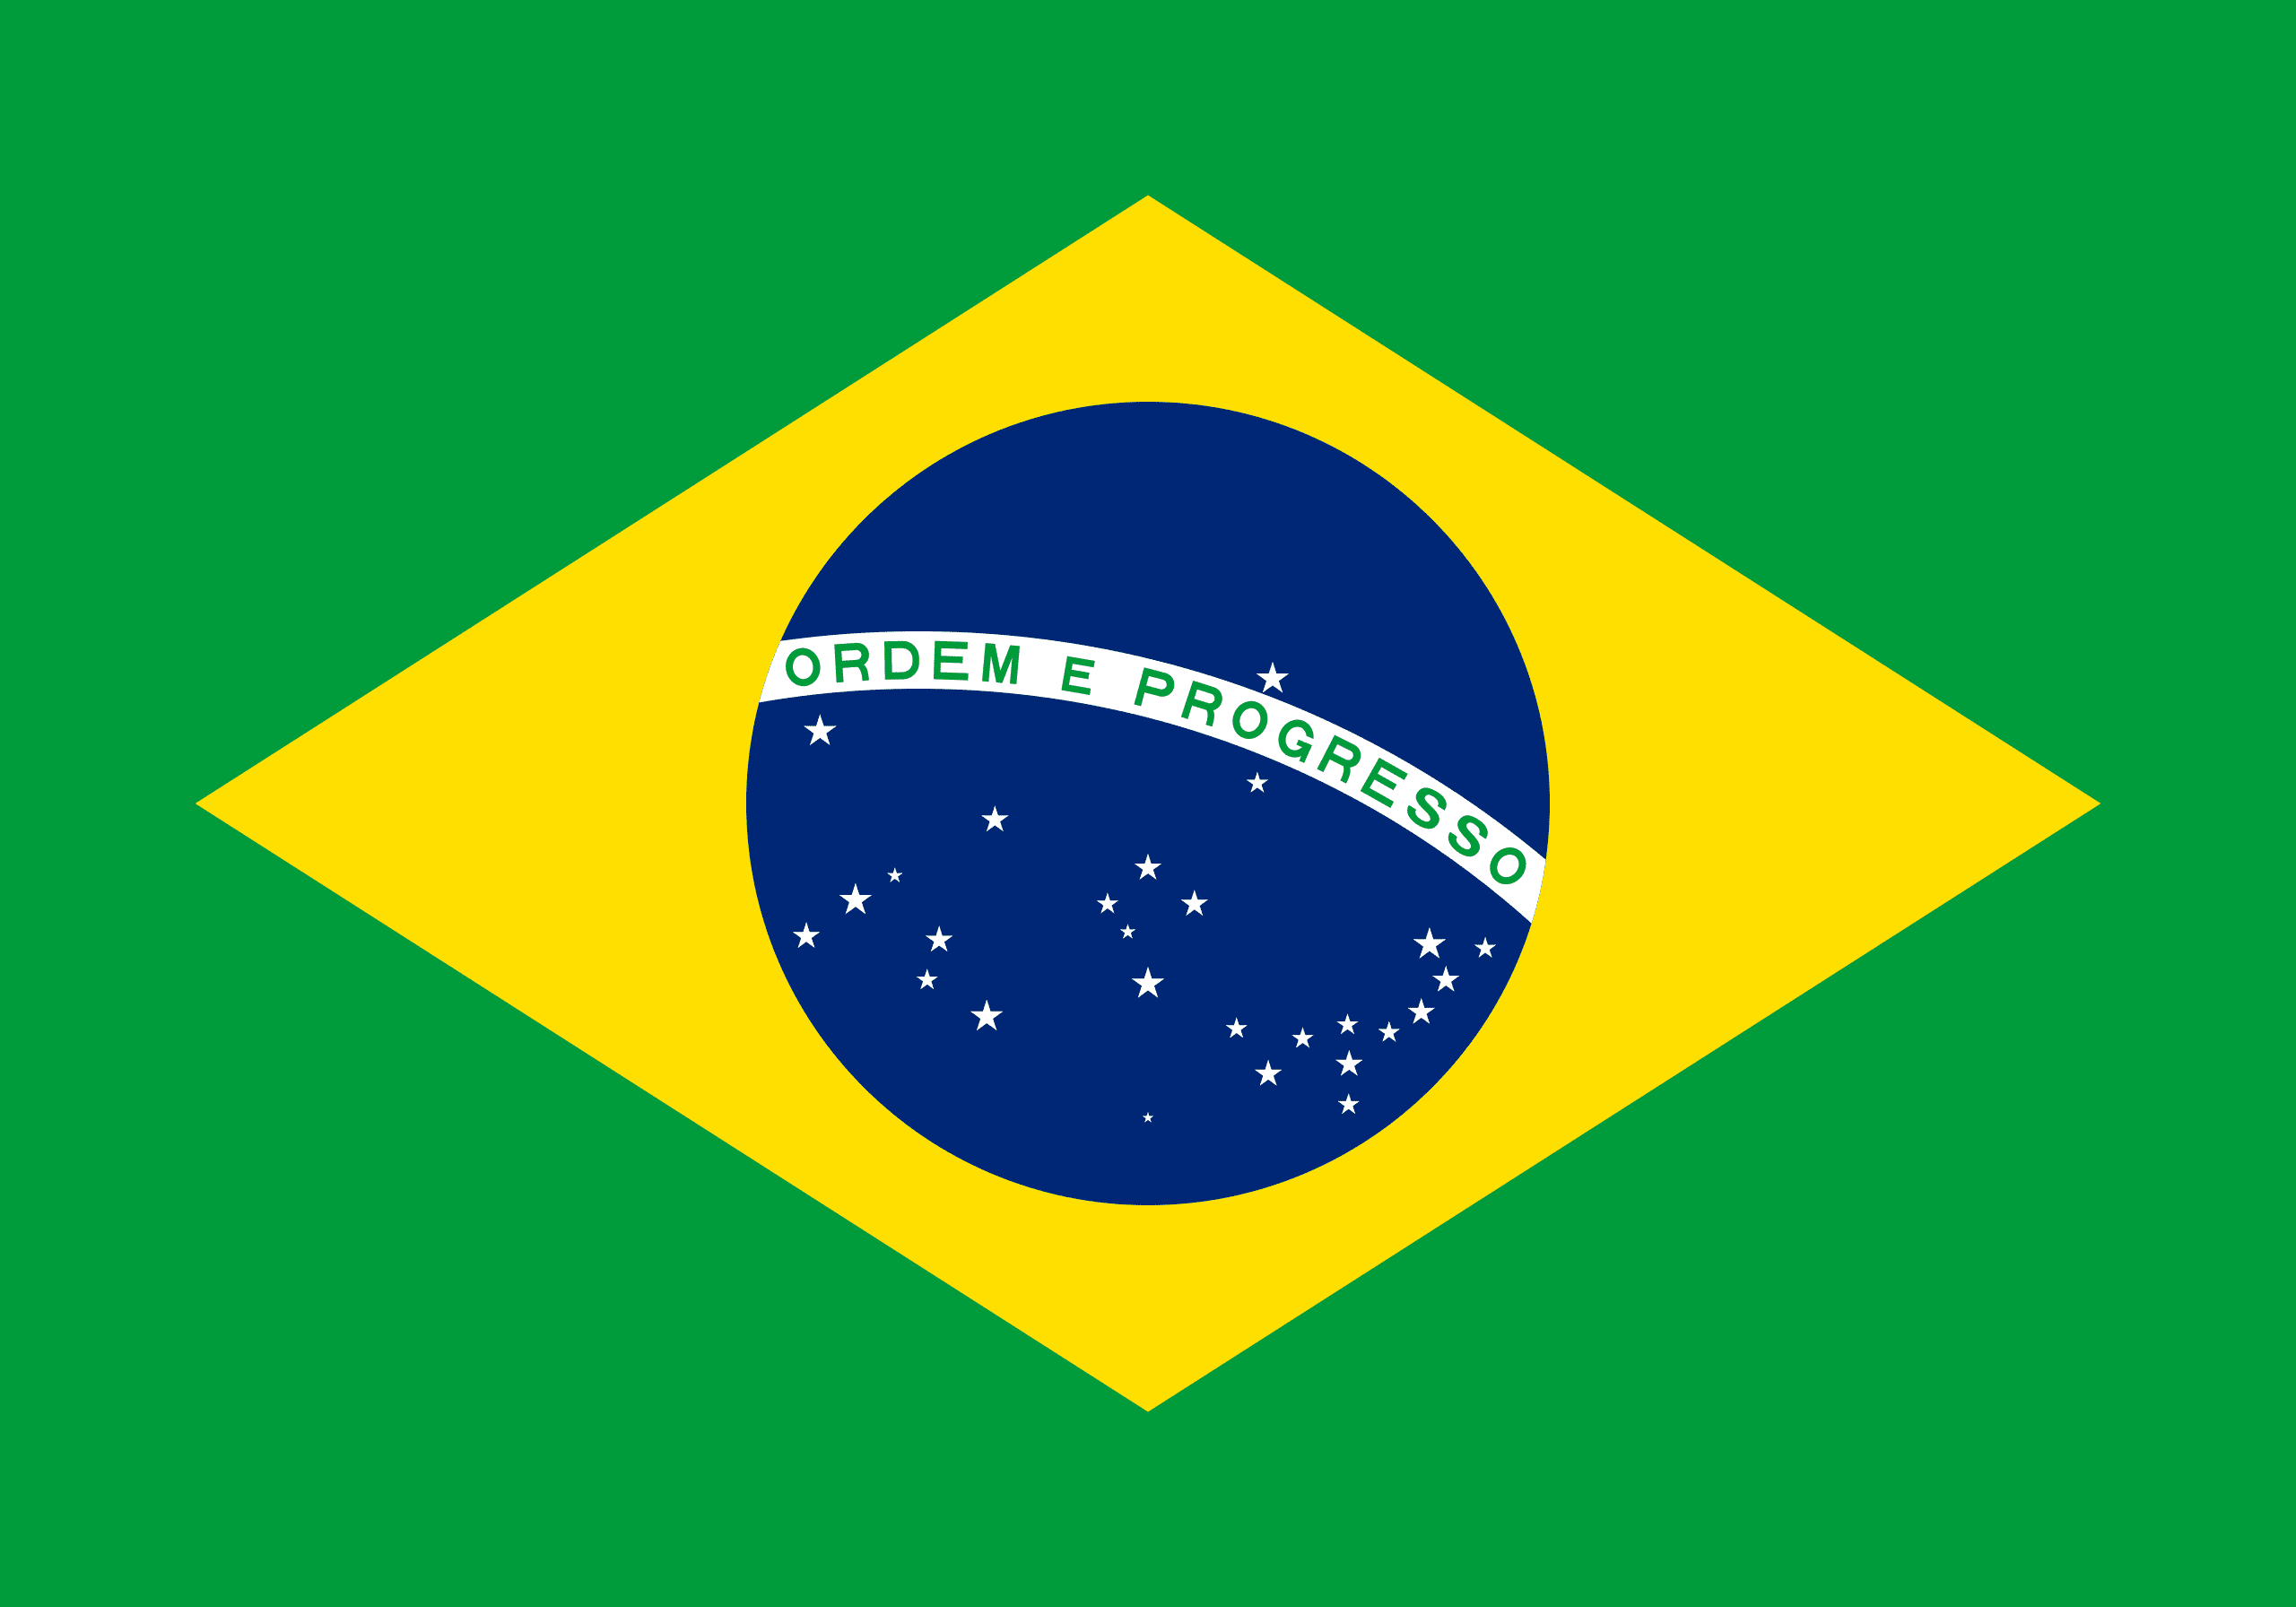 Facts of Brazil